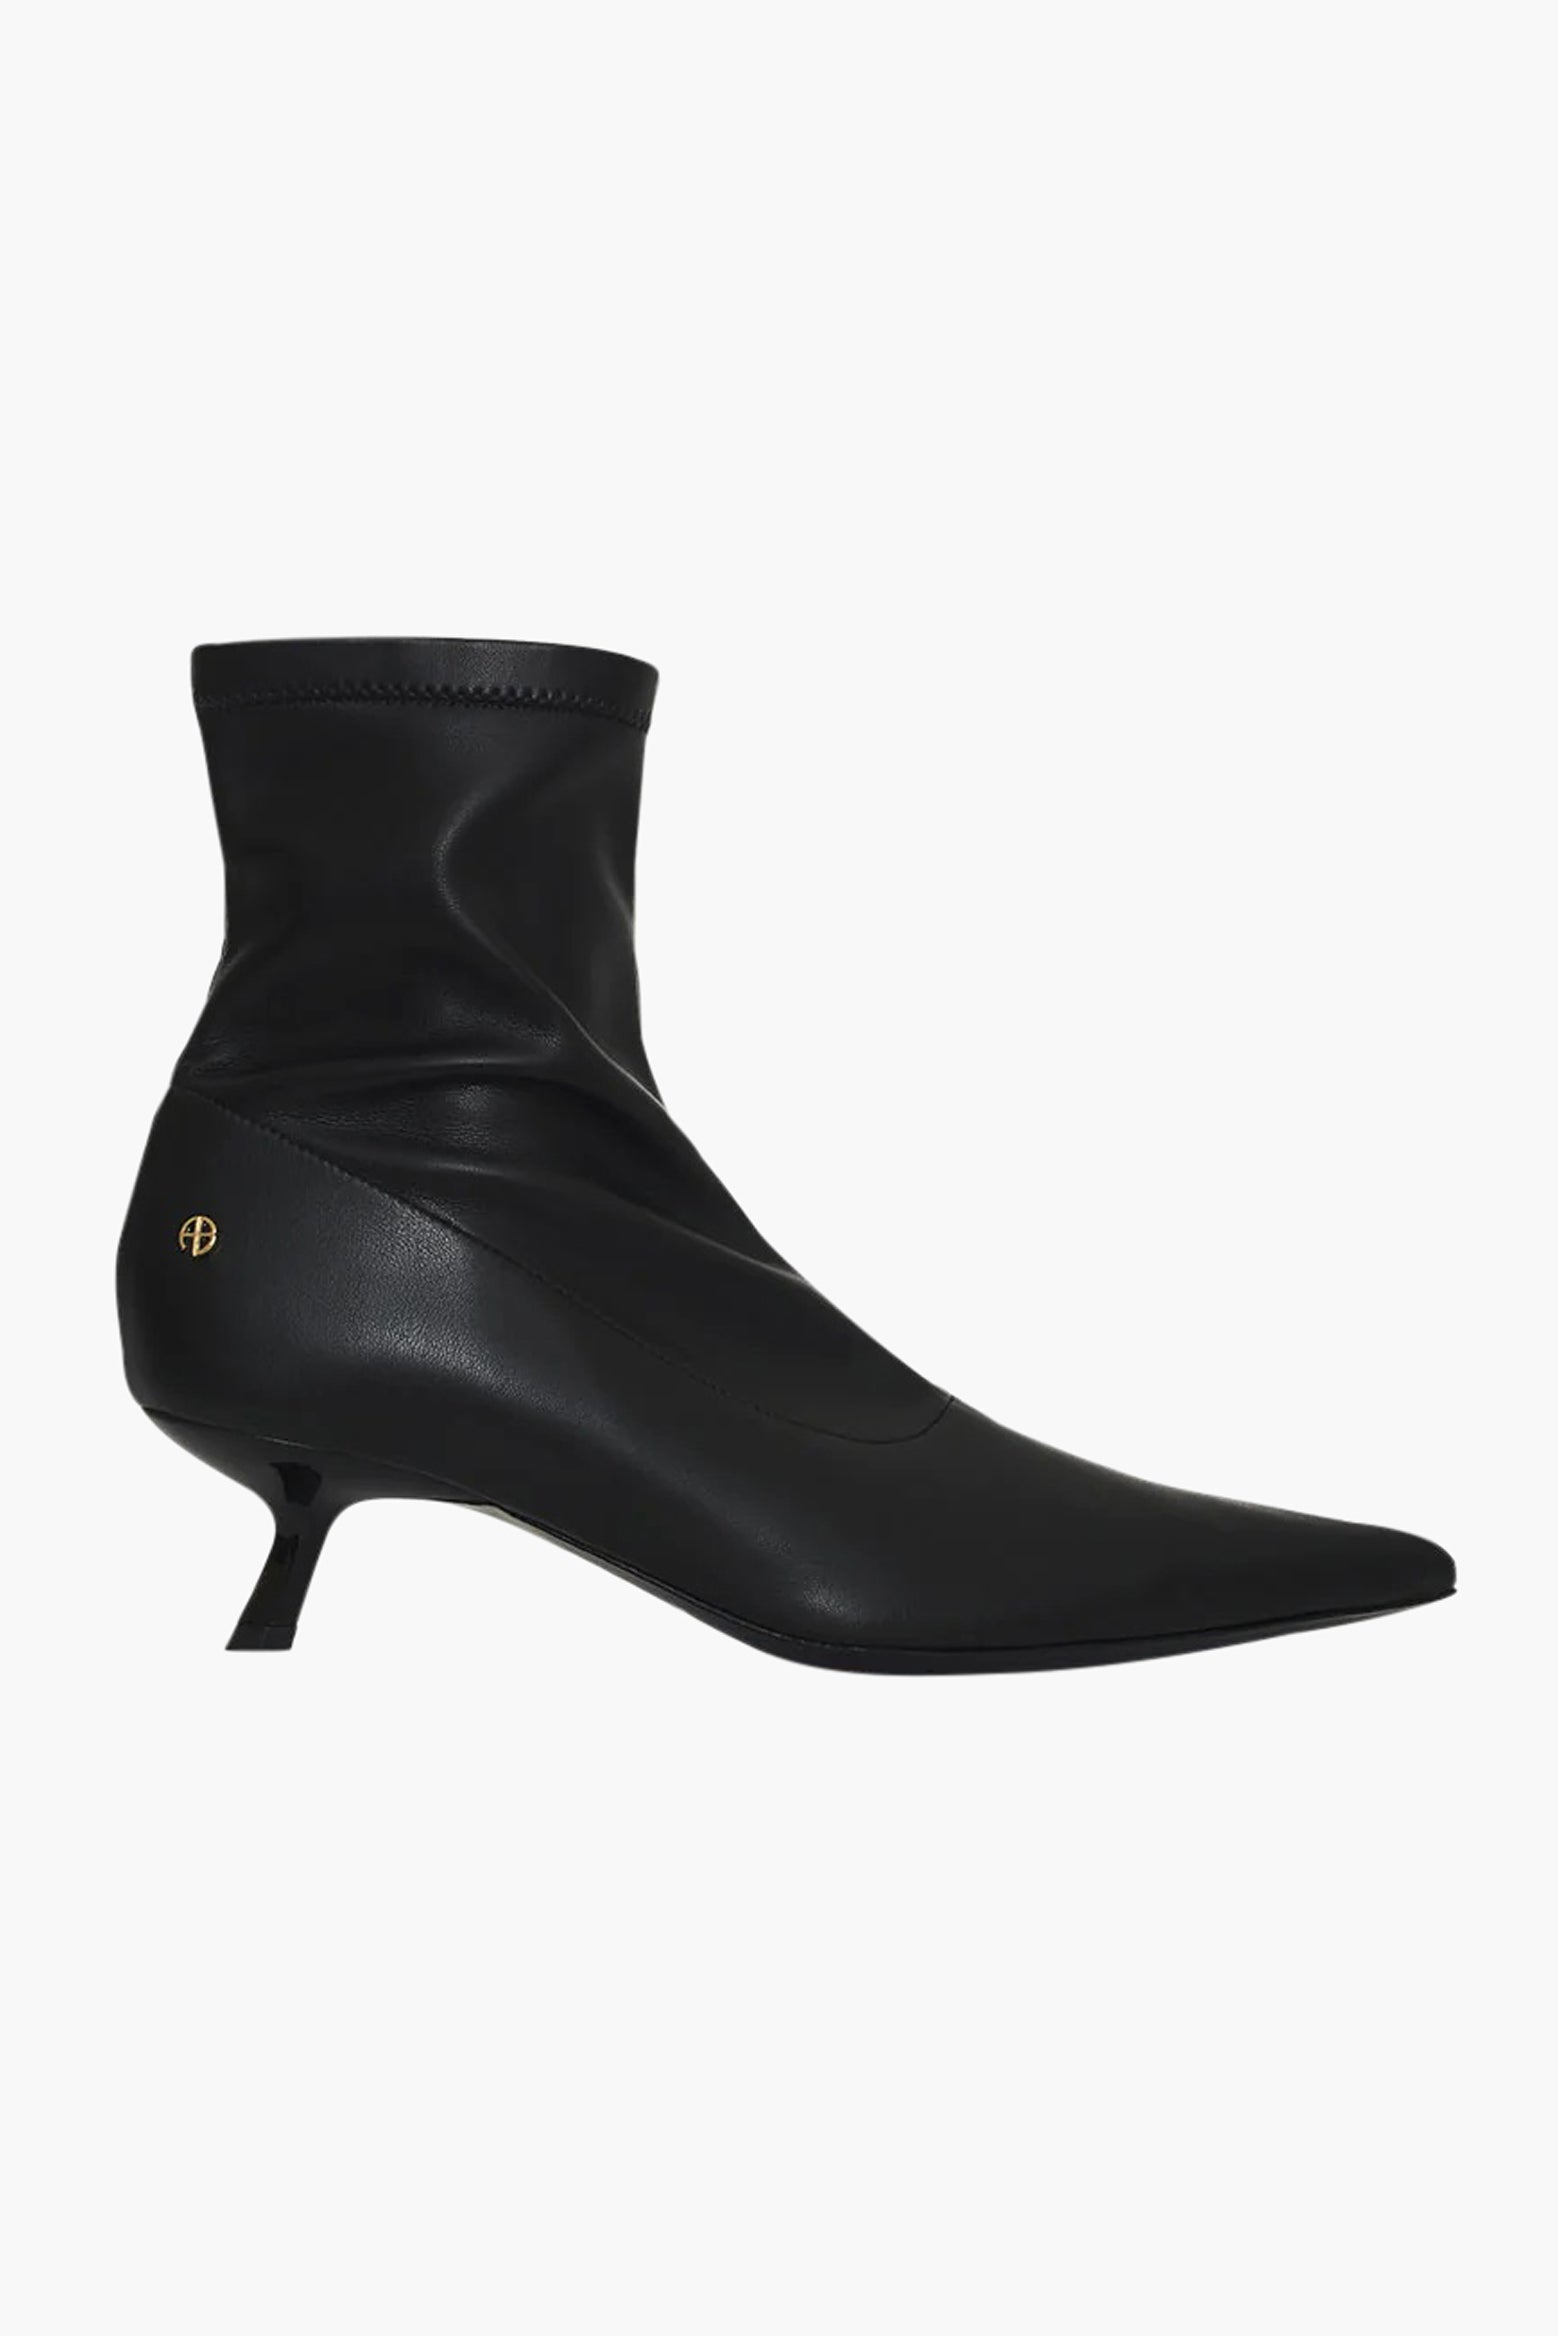 ANINE BING Hilda Boots in Black available at TNT The New Trend Australia.